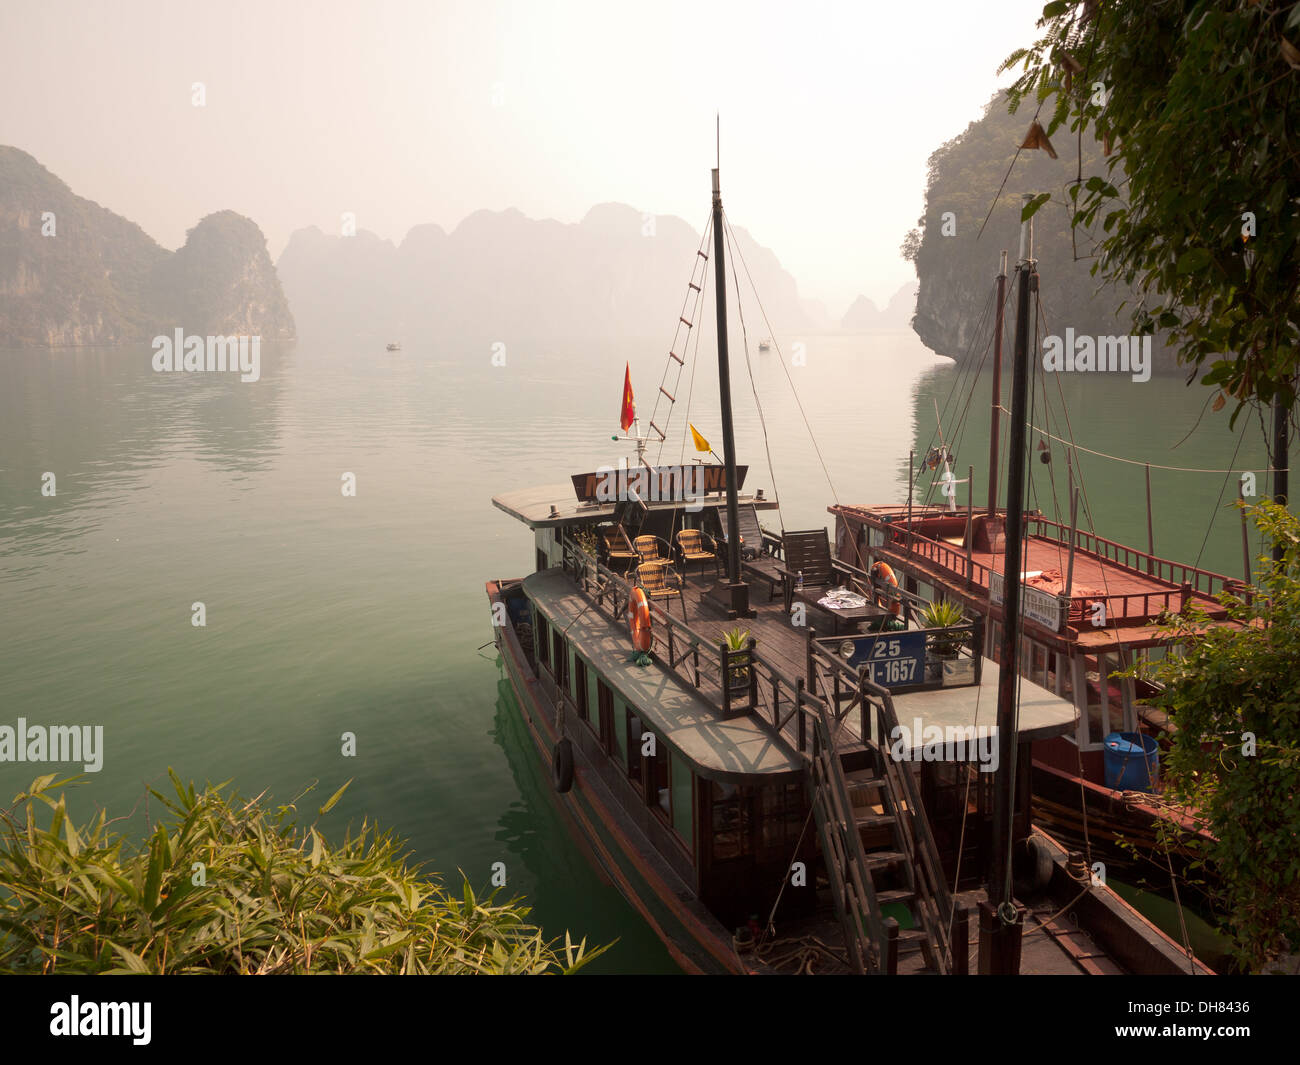 A view of the spectacular limestone karst formations and boats moored  in Halong Bay, Vietnam. Stock Photo